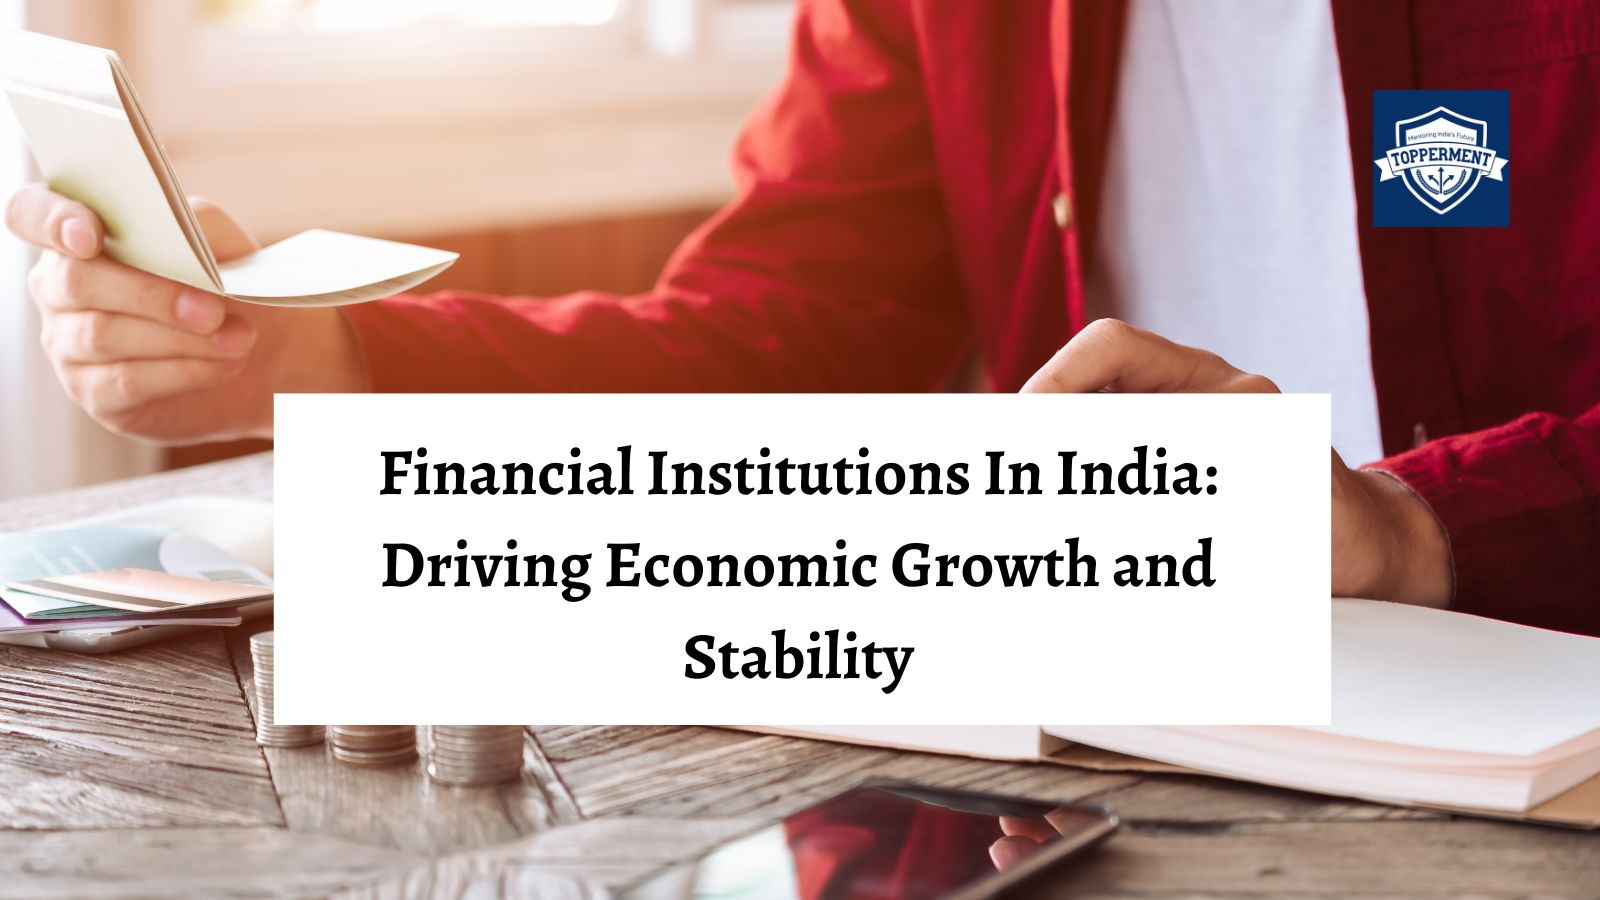 Financial Institutions in India Driving Economic Growth and Stability | Best UPSC IAS Coaching For Guidance and Mentorship